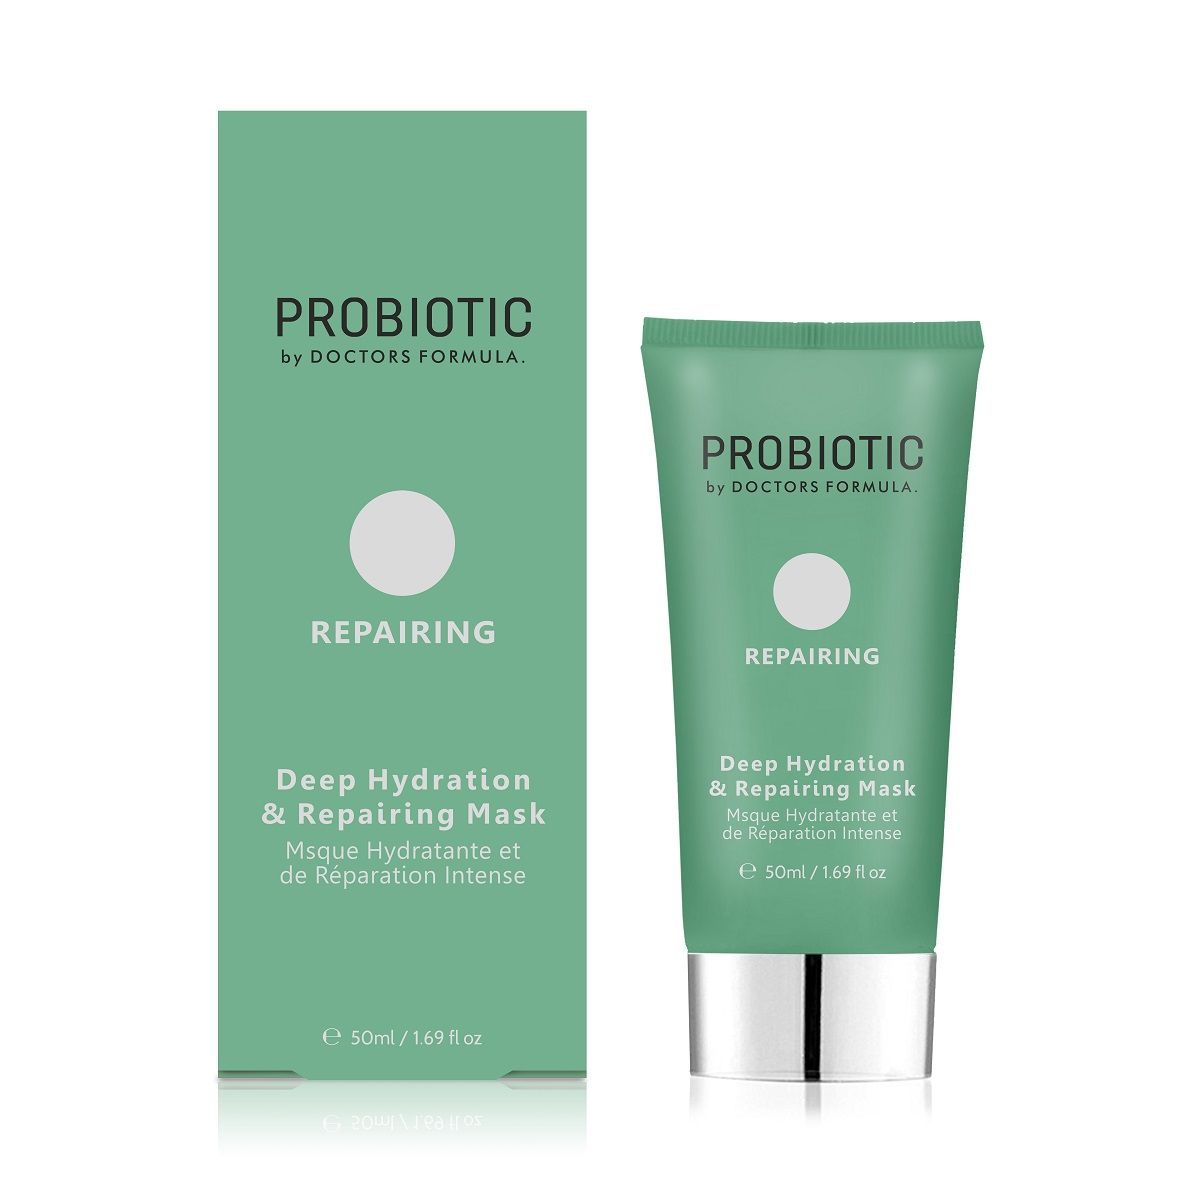 WHAT IS IT: Doctors Formula Probiotics Repairing - Deep Hydration & Repairing Mask 50ml
Deep Hydration & Repairing Mask has the power to provide instant results to the complexion.
Designed to refine pores, draw out impurities, even out skin tone and increase hydration.
Using this face mask 2-3 times a week will give the skin that extra boost of hydration. 
Smooth a thin layer onto the skin after cleansing. Leave on for 5-10 minutes & wash off.
KEY BENEFITS:
Provides long lasting hydration
Smoother, more radiant looking complexion
Plumps skin
Skin feels hydrated, balanced & strong